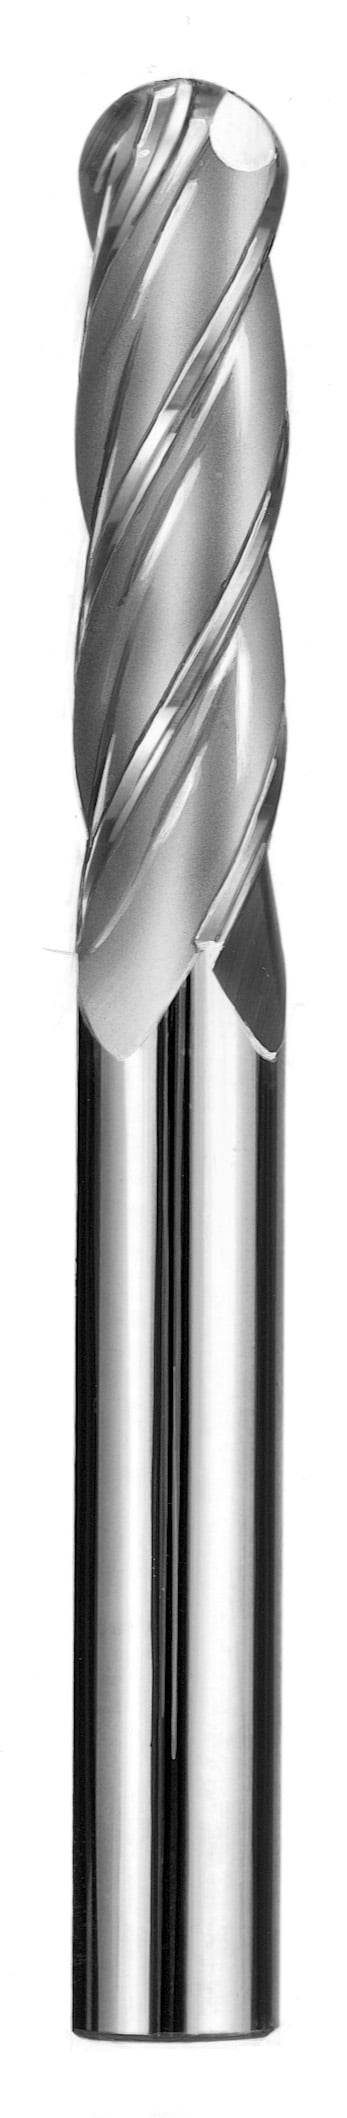 1/8" Dia, 4 Flute, Ball Nose End Mill - 33142